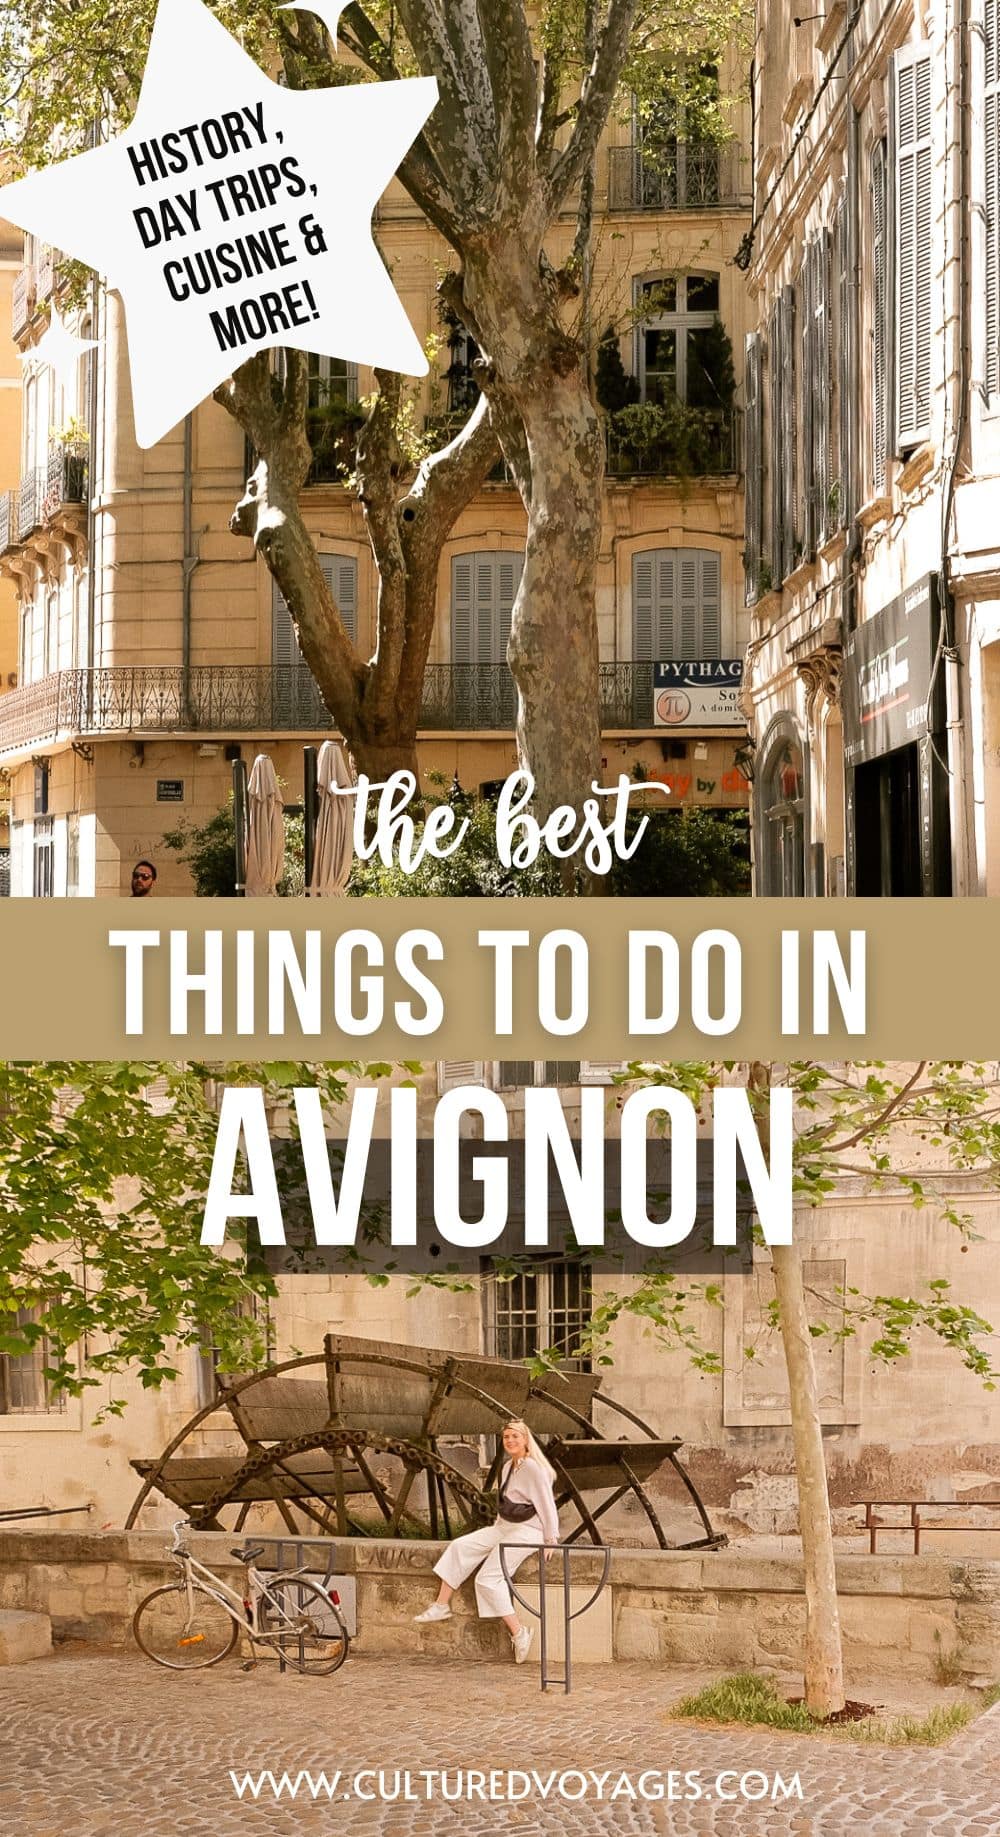 things to do in avignon pin cover, showing top image of french city buildings with shutters and railed balconies, with old plan treres in fronth, and second image of girl sitting on wall in front of old water wheel on rue des teinturiers